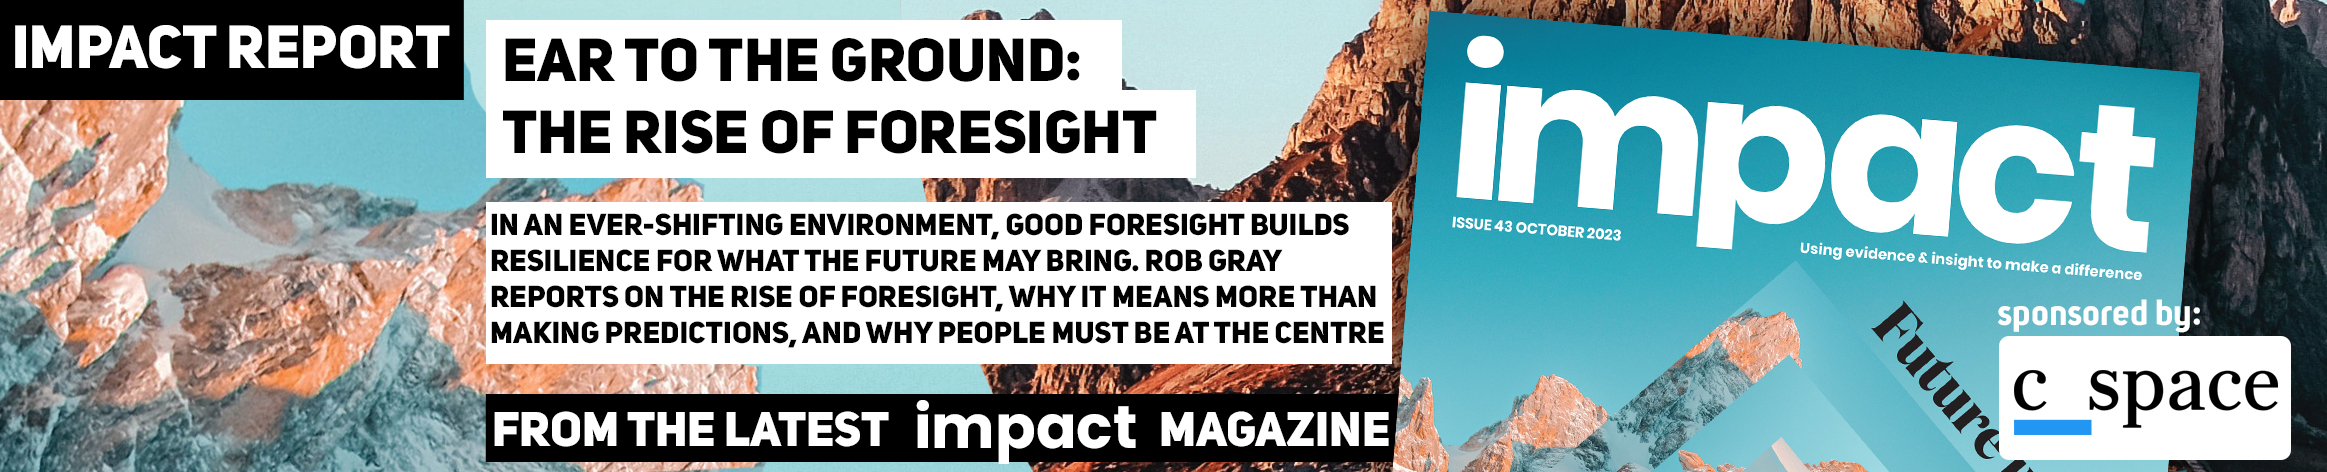 Ear to the Ground: The Rise of Foresight